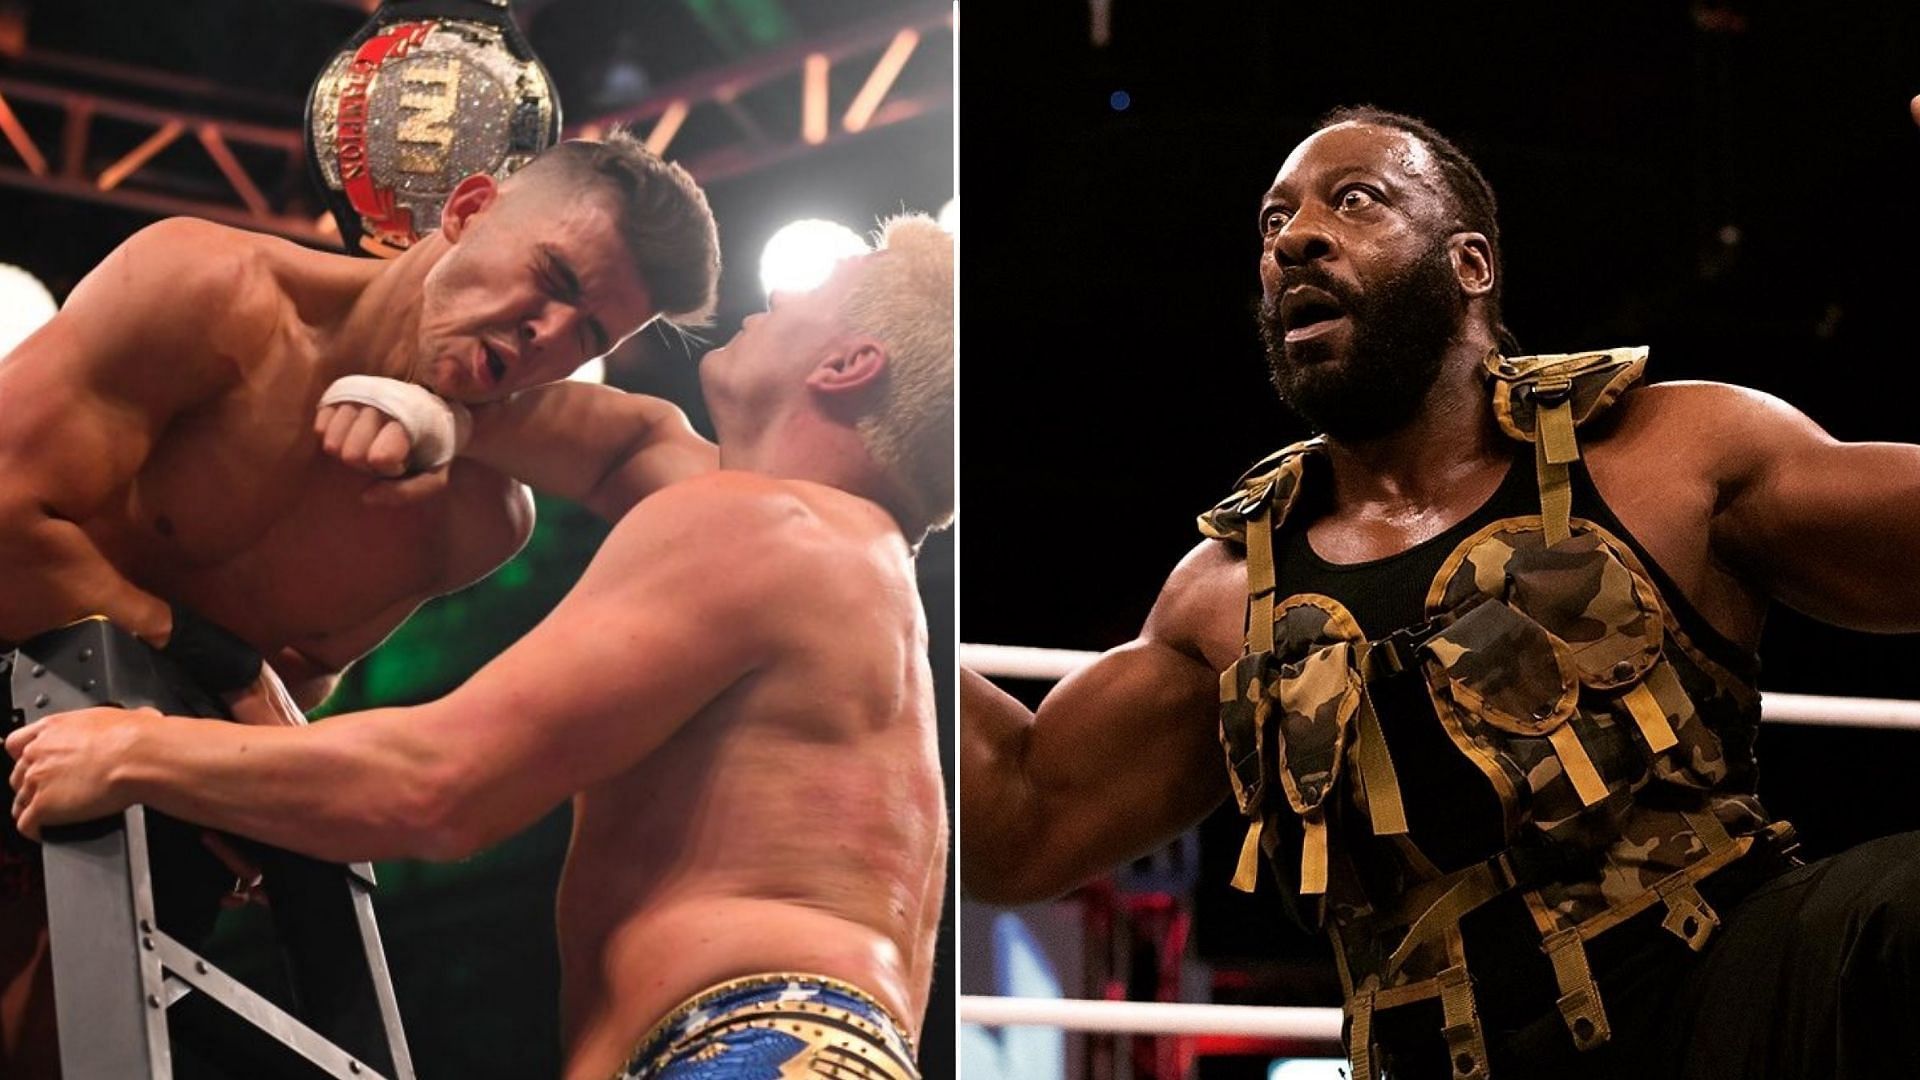 Booker T weighed in on the use of gimmick matches in AEW